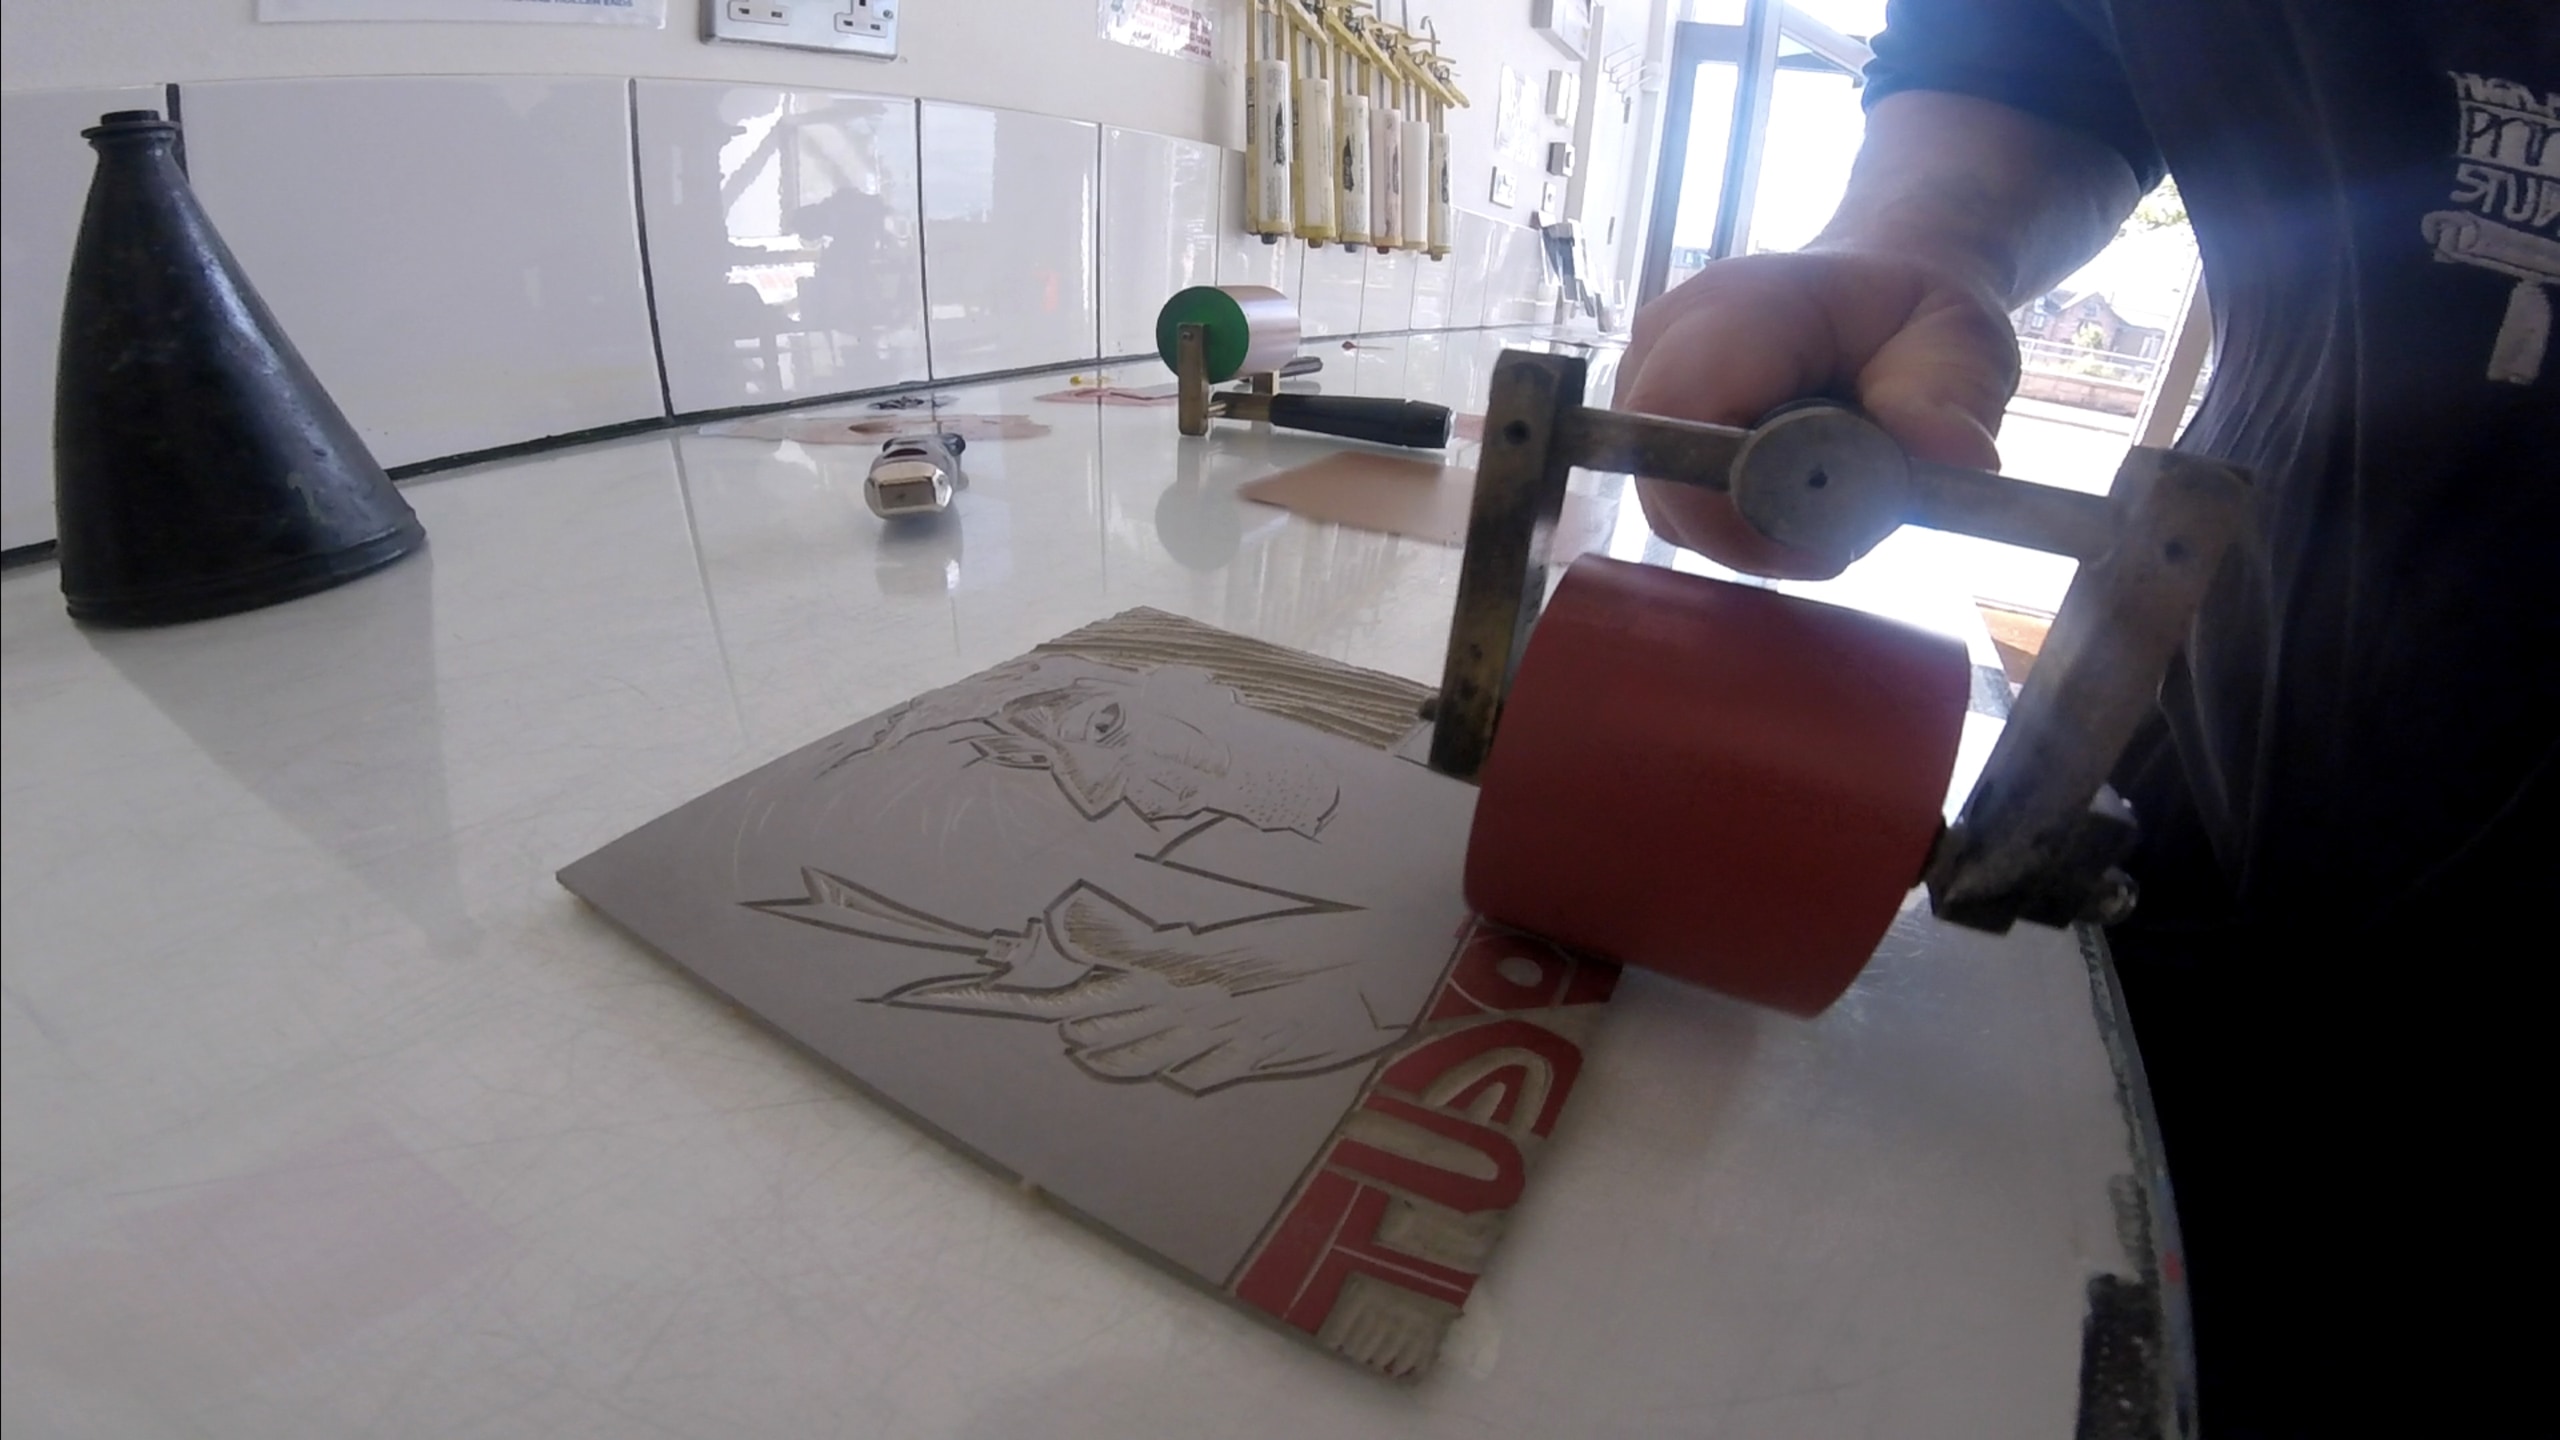 A person inking up the relief plate using rollers of ink